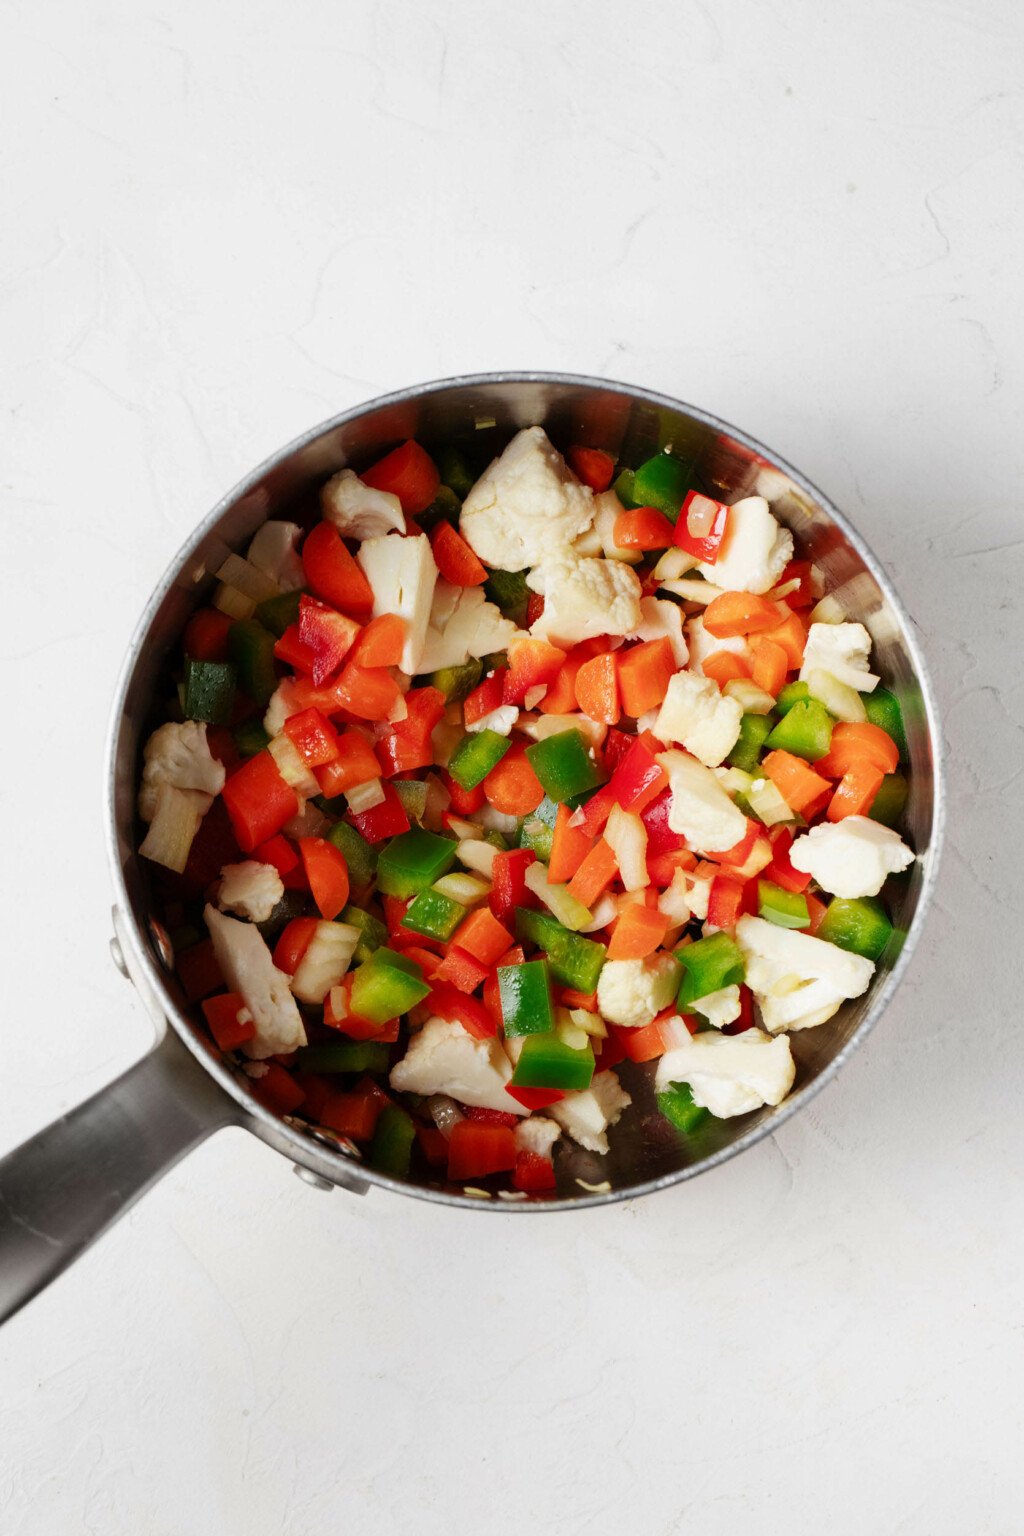 An overhead image of a bowl with peppers, cauliflower, and carrots.